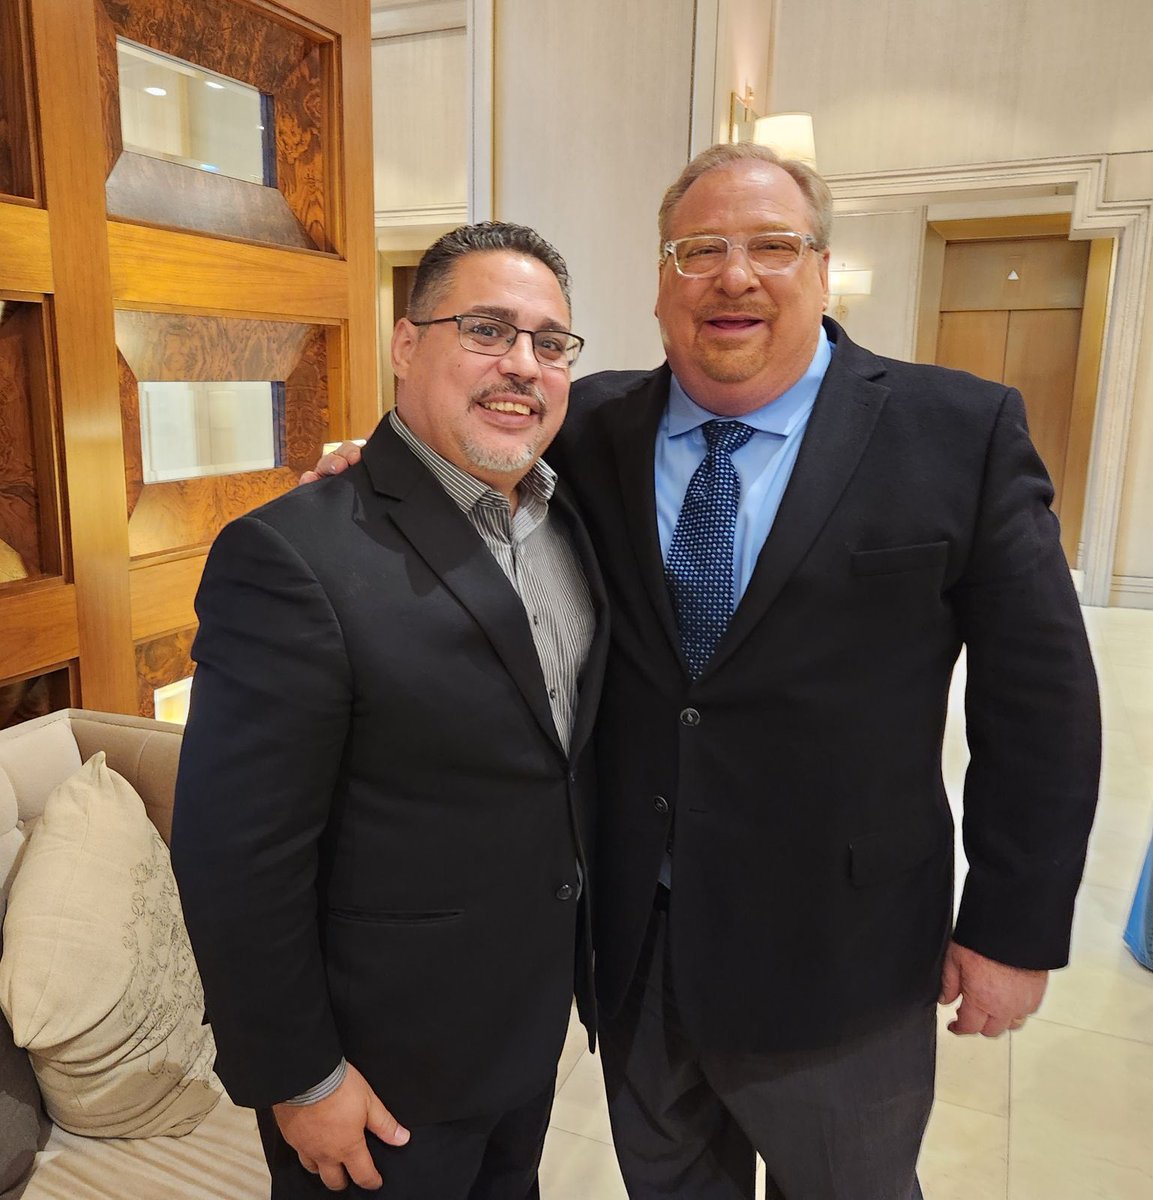 I was on a panel of pastors with @RickWarren. What I remember most was his humility and contagious laughter. Also loved that he tried to say a few words in Spanish. Thanks Rick for your example! May God keep using you.